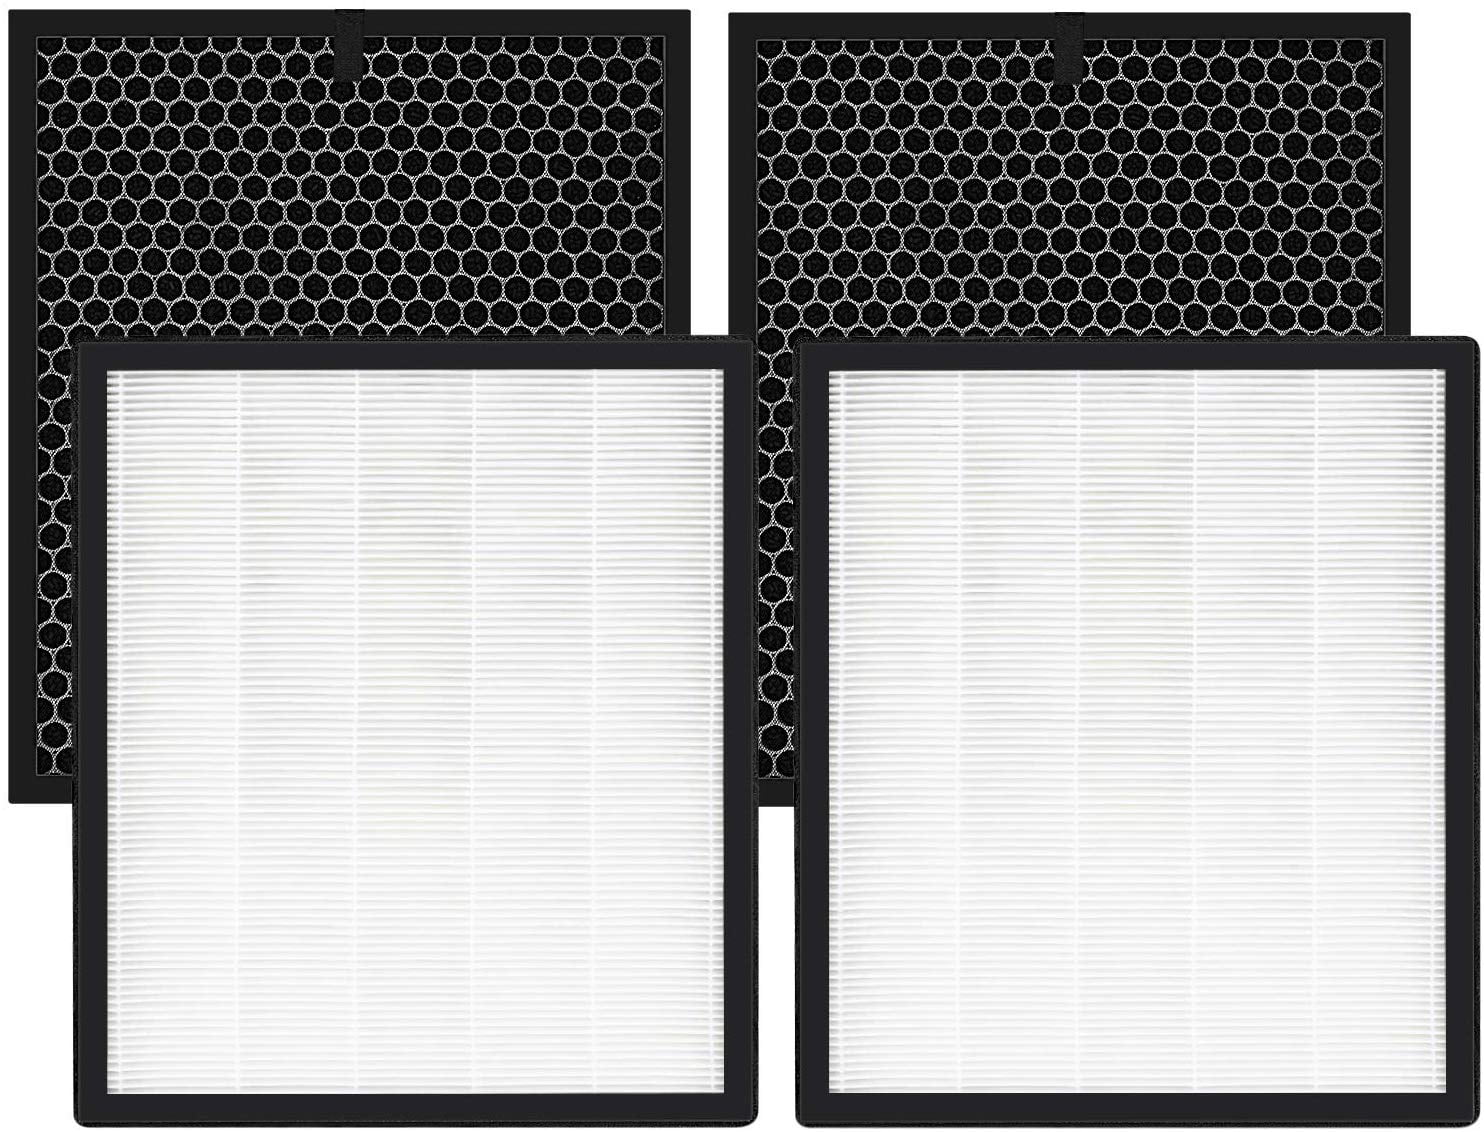 PUREBURG LV-PUR131 Replacement 1 HEPA Filter and 1 Carbon Pad